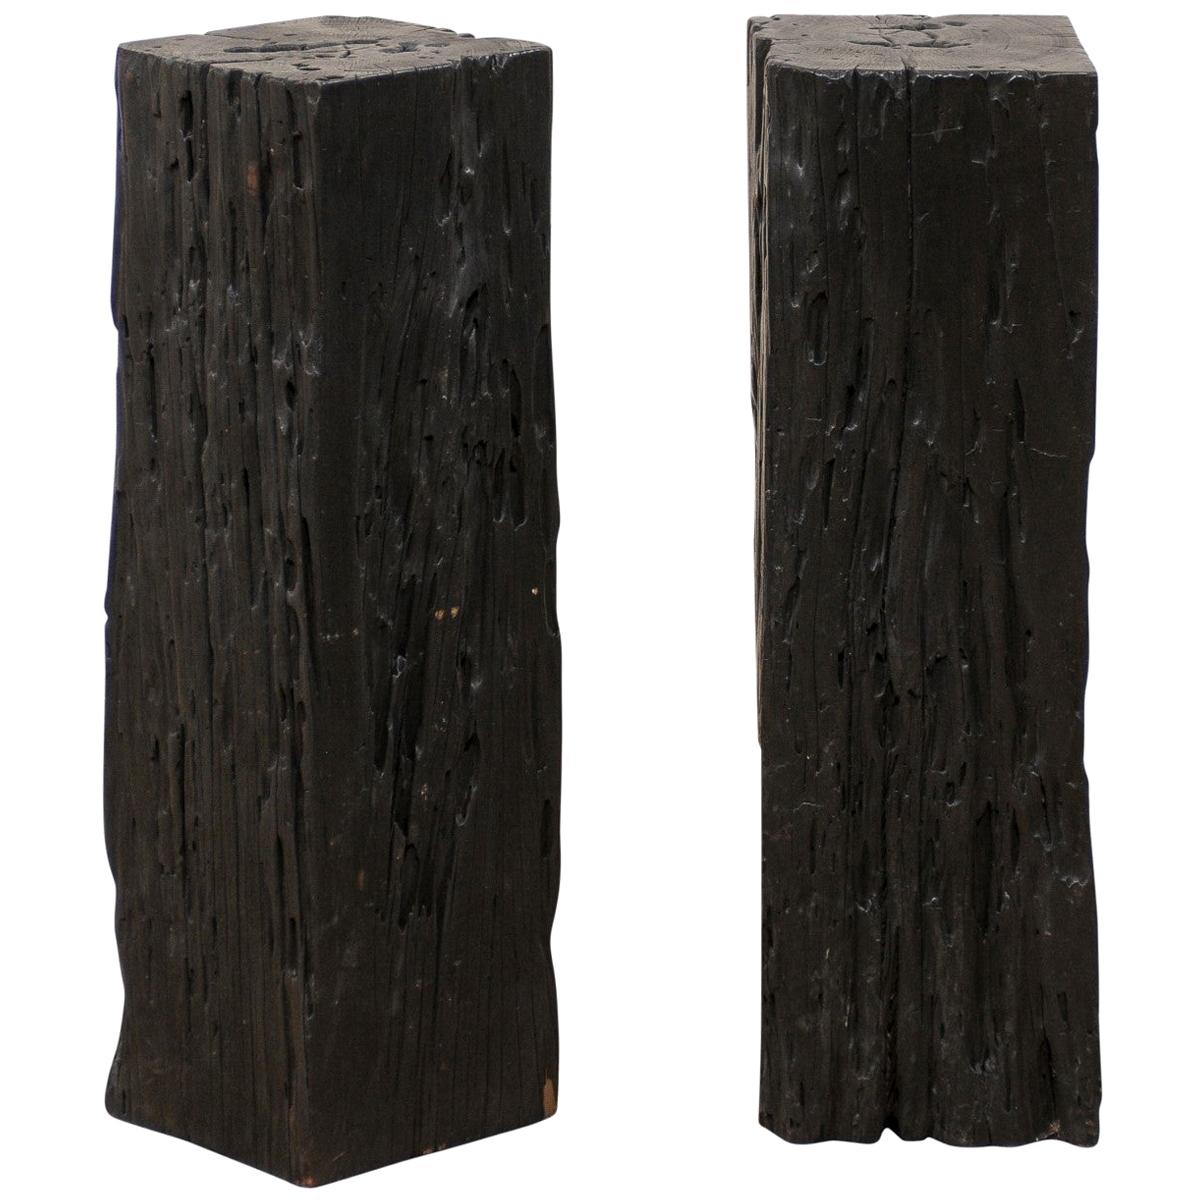 Pair 2.5 Ft Tall Carbonized Wood Square Shaped Pedestals, Rich Black Color 